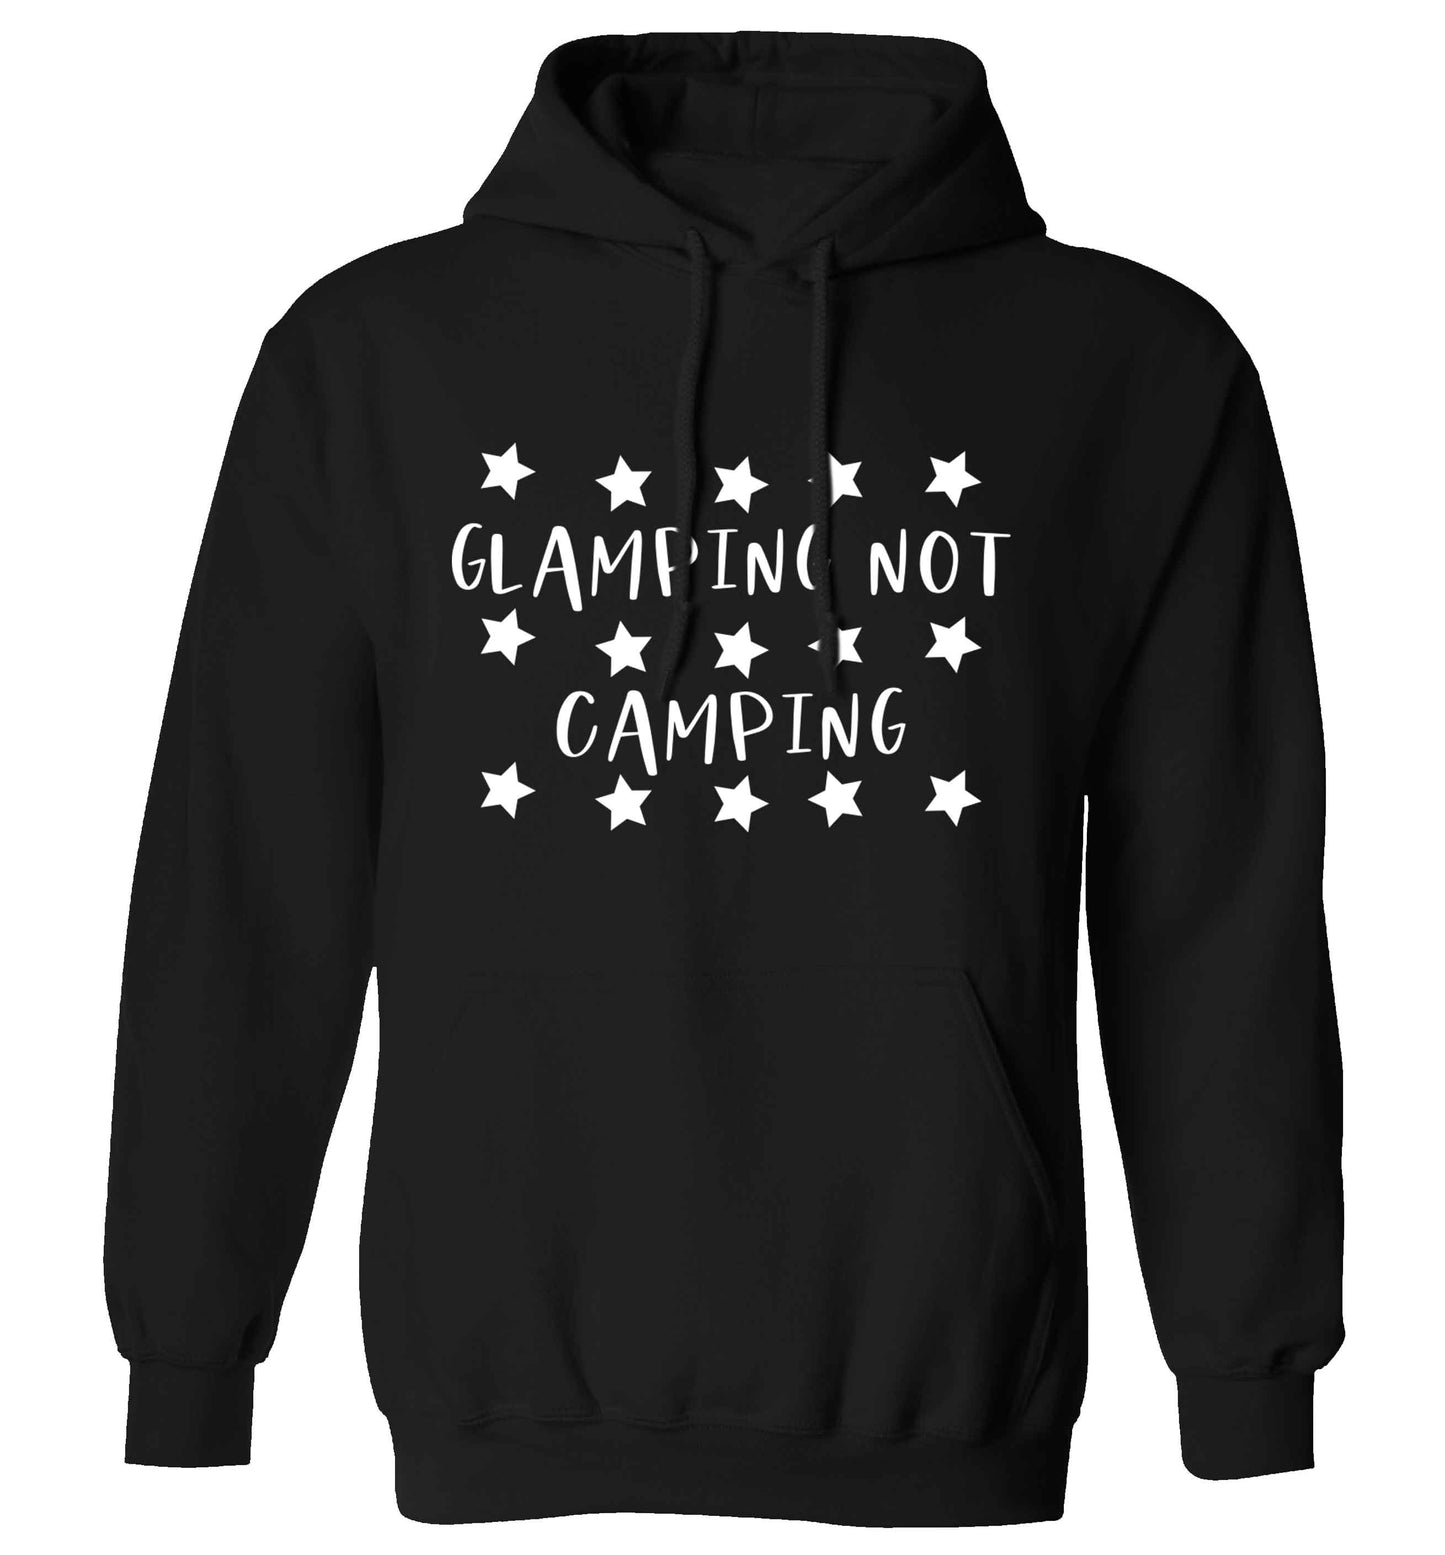 Glamping not camping adults unisex black hoodie 2XL